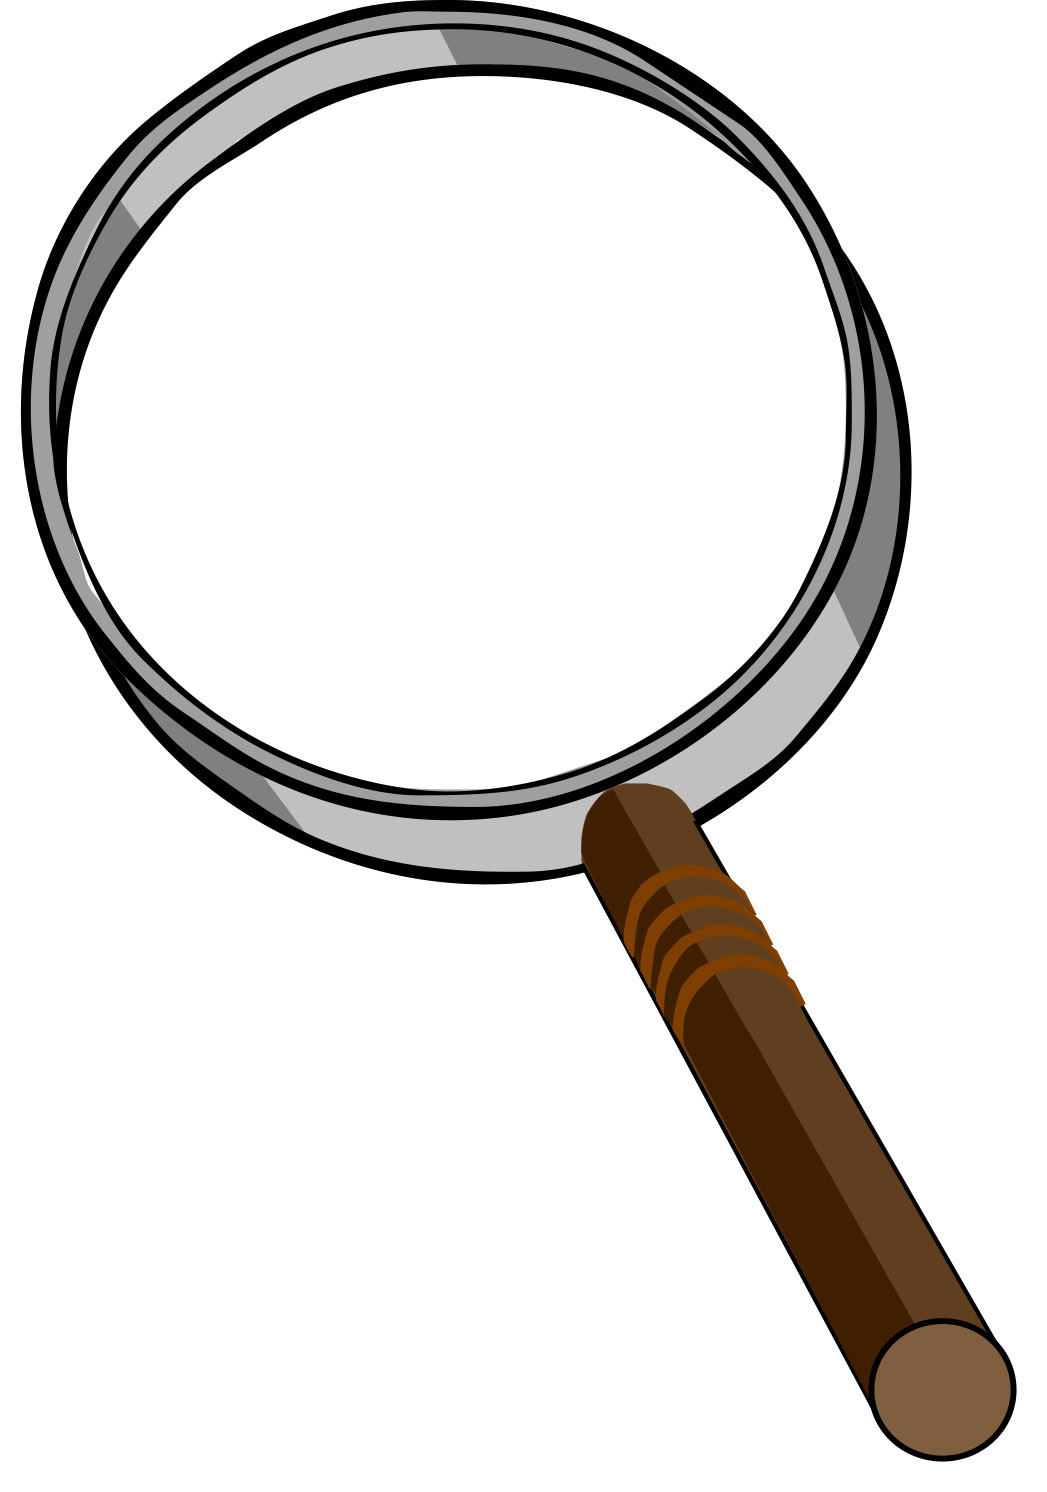 Magnifying Glass Clipart Blac - Magnifying Glass Clipart Free